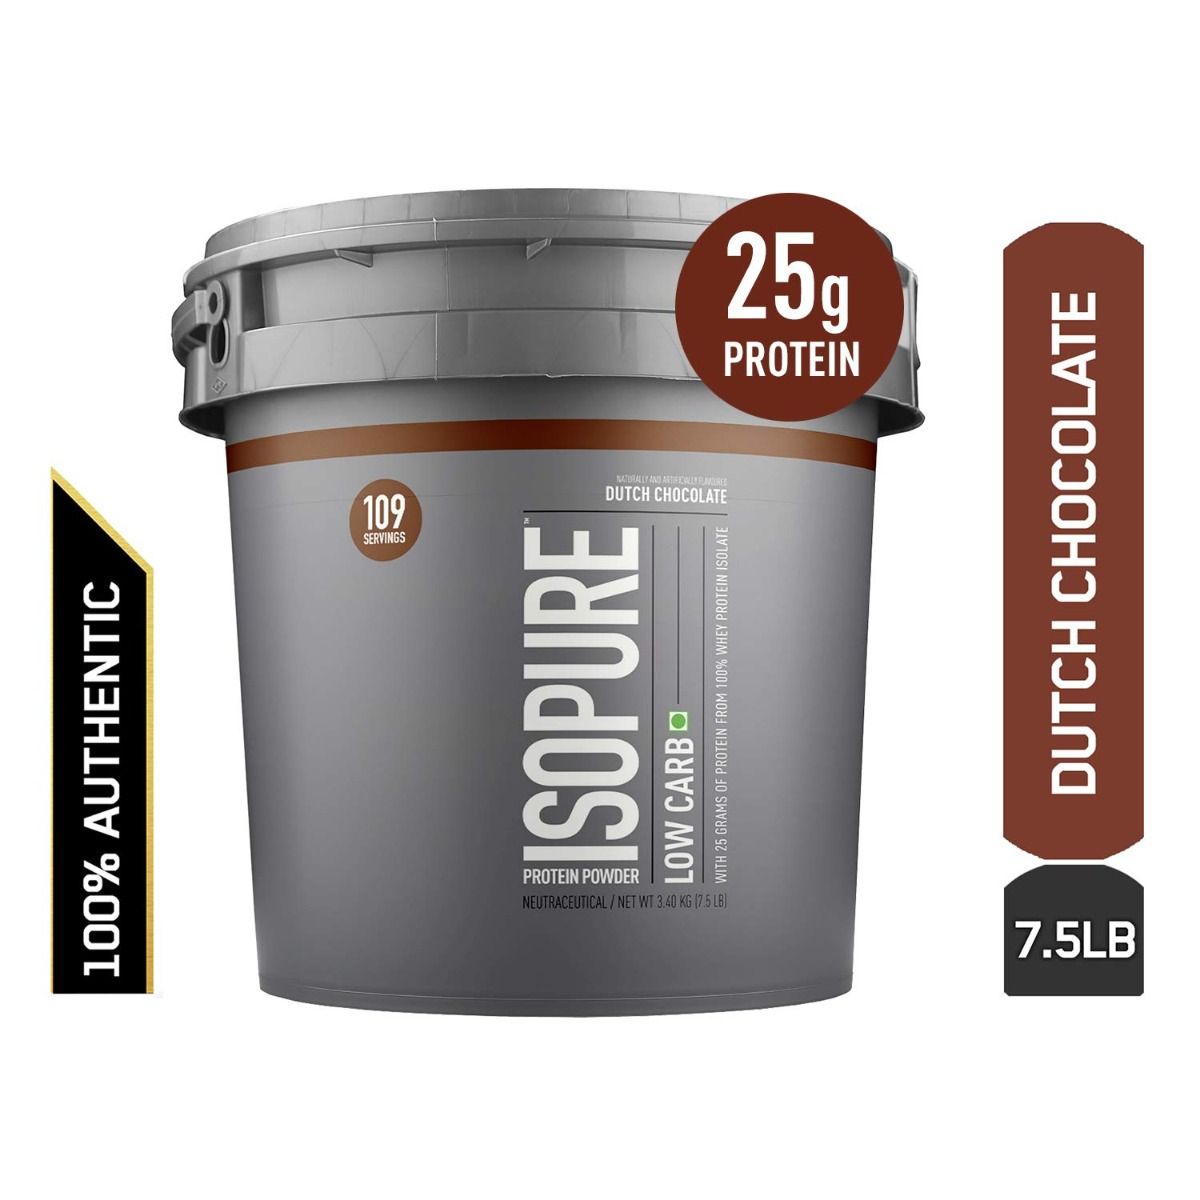 Isopure Low Carb Dutch Chocolate Flavoured Powder, 7.5 lb, Pack of 1 